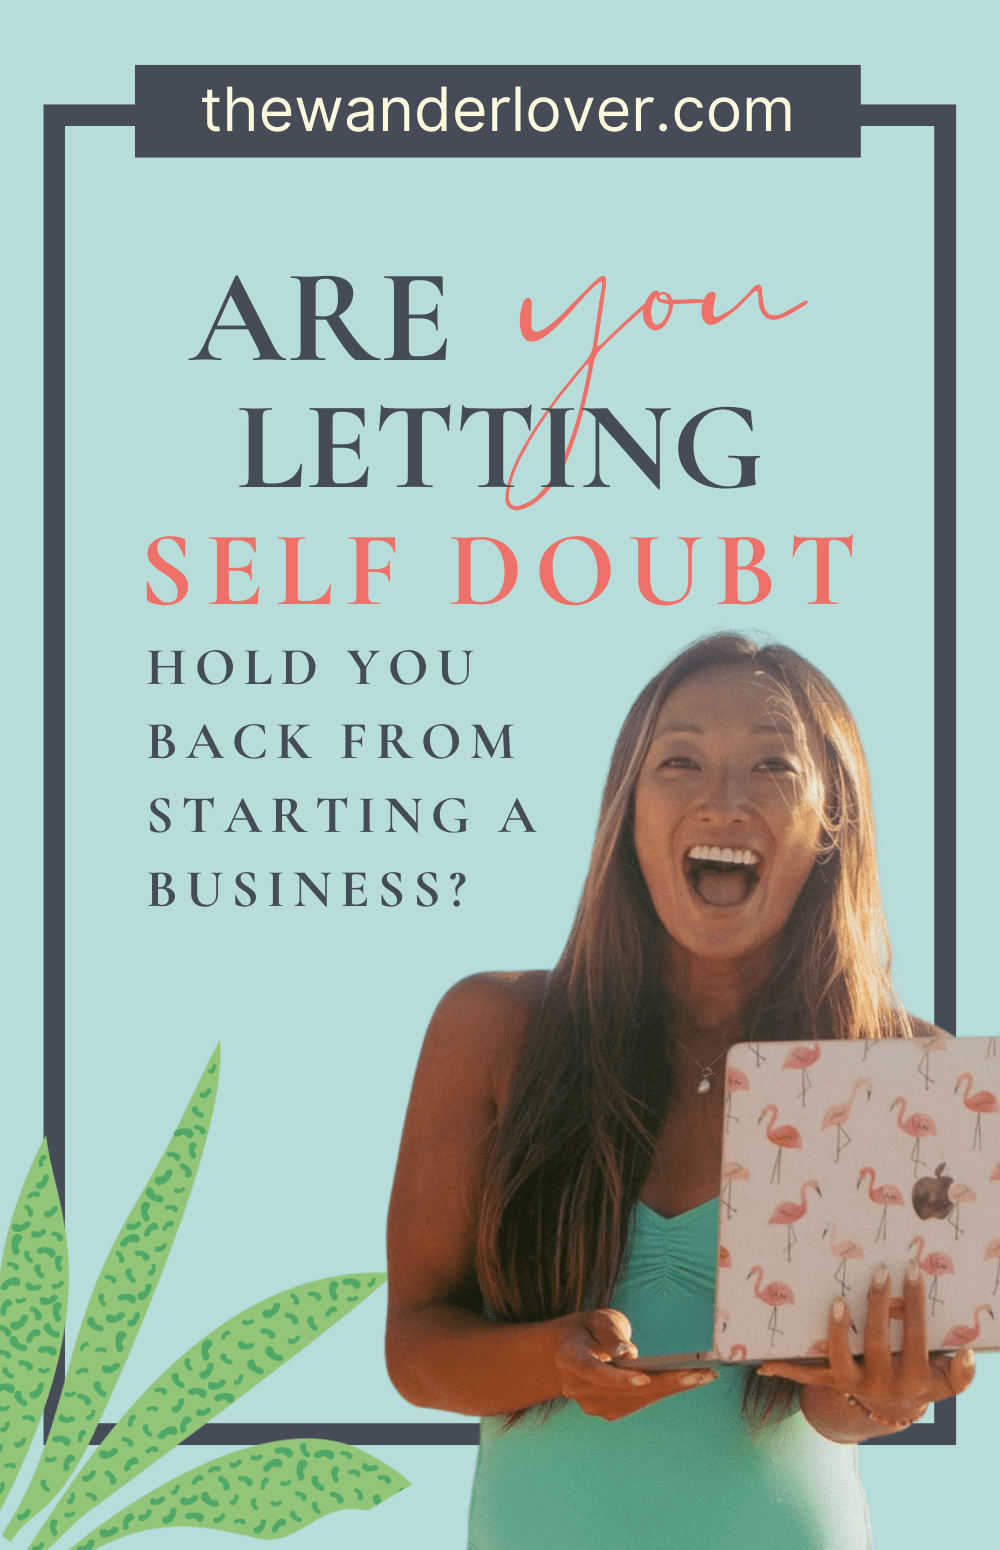 7 Limiting Beliefs That Are Holding You Back as an Entrepreneur